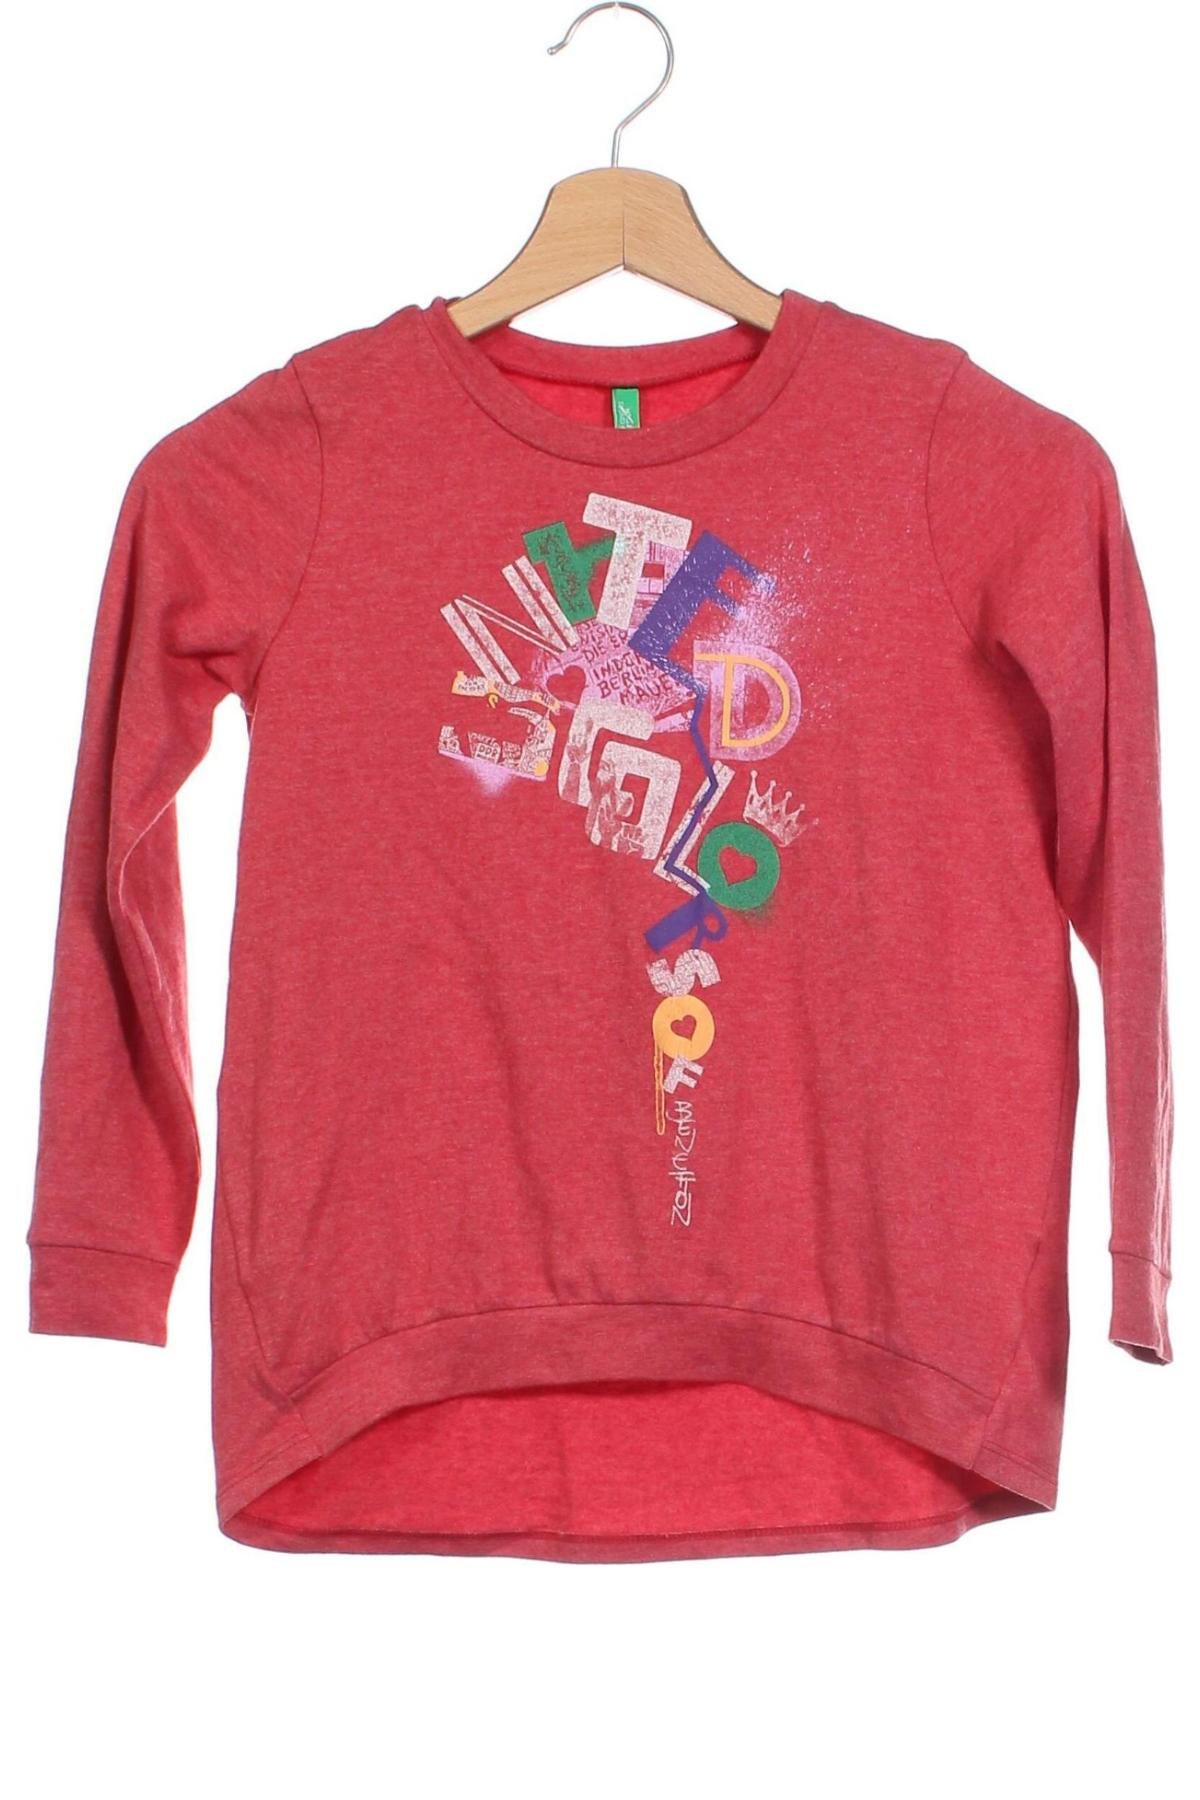 Kinder Shirt United Colors Of Benetton, Größe 8-9y/ 134-140 cm, Farbe Rot, Preis € 6,75